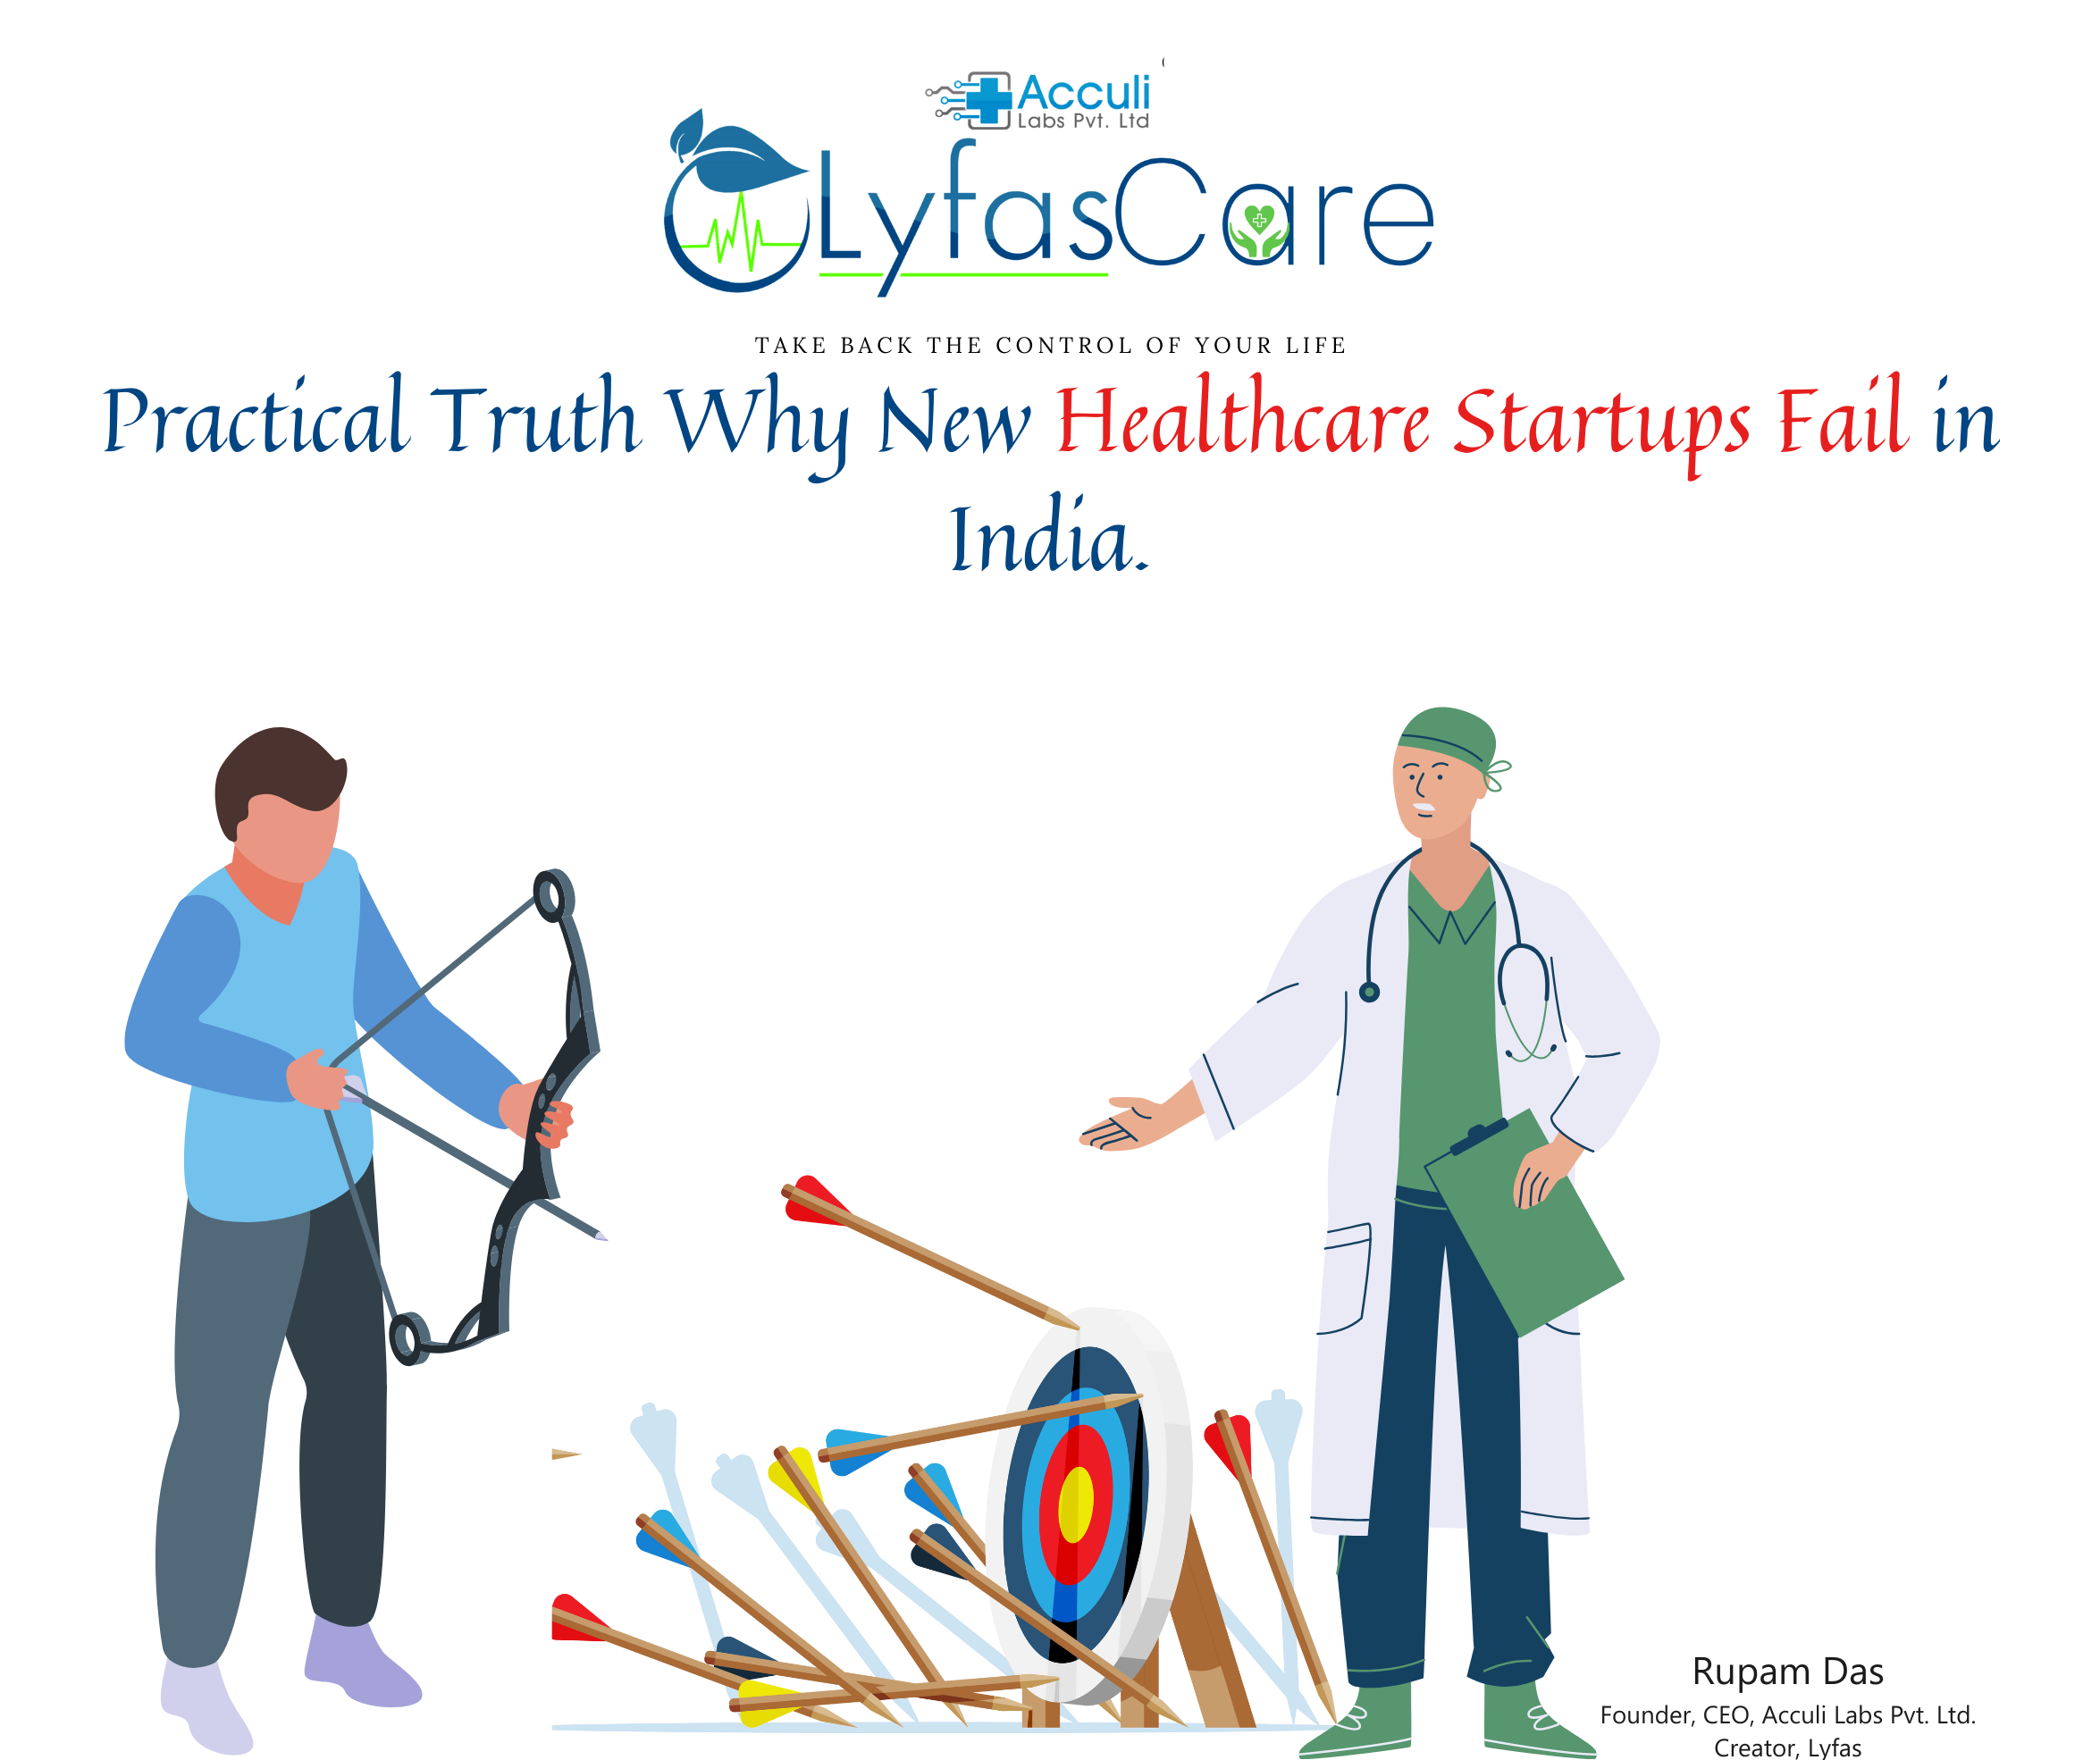 Practical Truth Why New Healthcare Startups Fail in India.